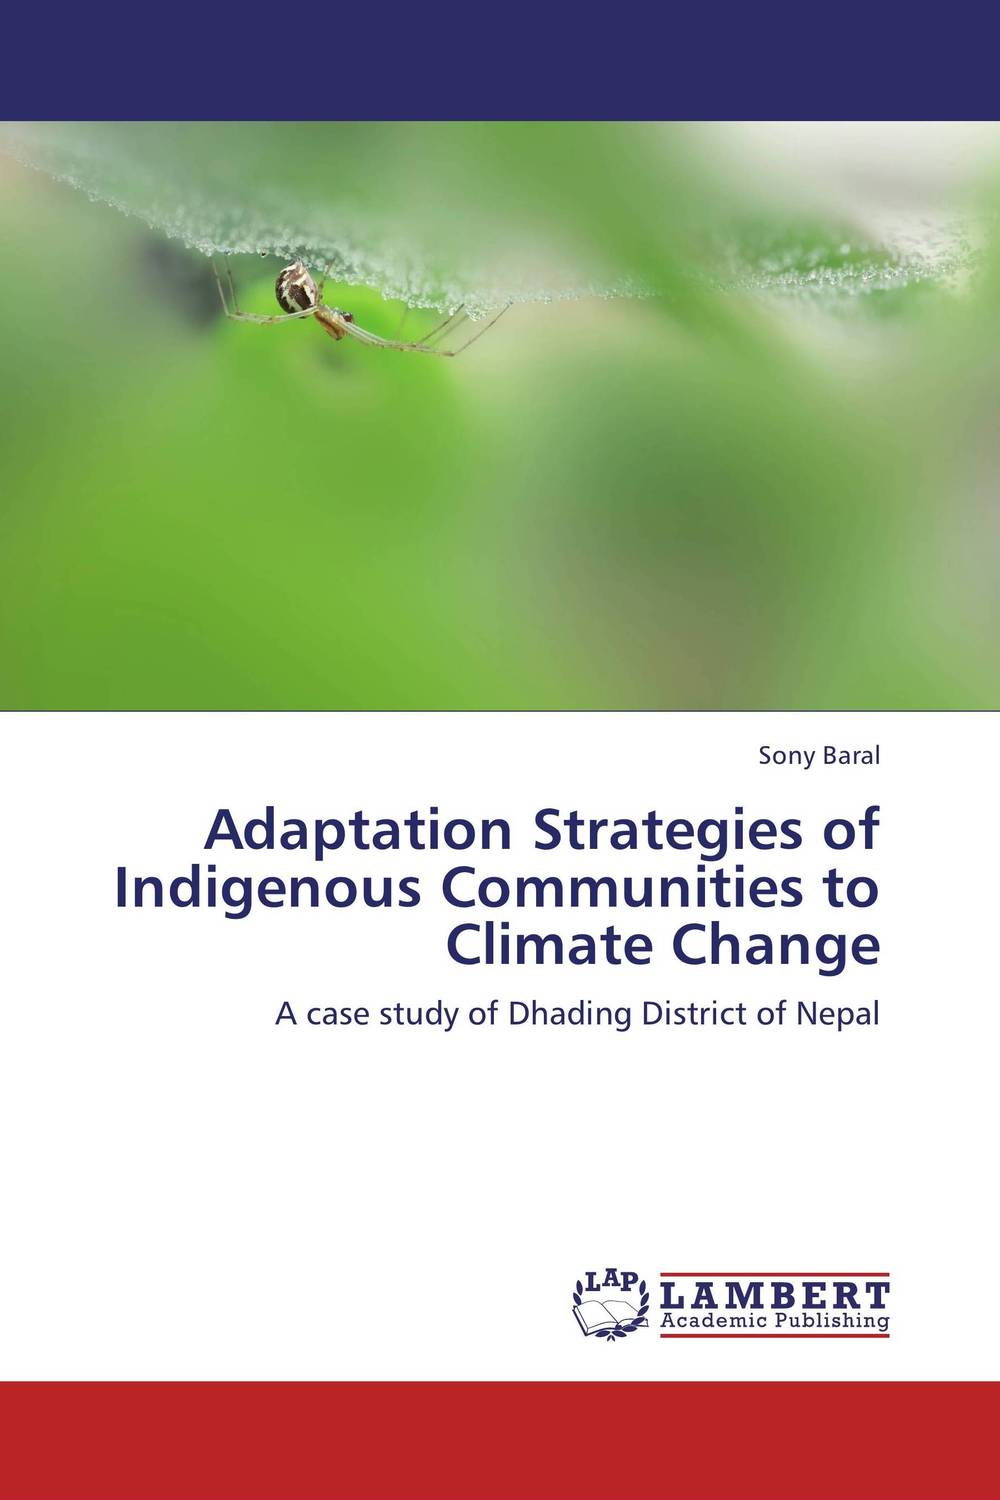 Adaptation Strategies of Indigenous Communities to Climate Change